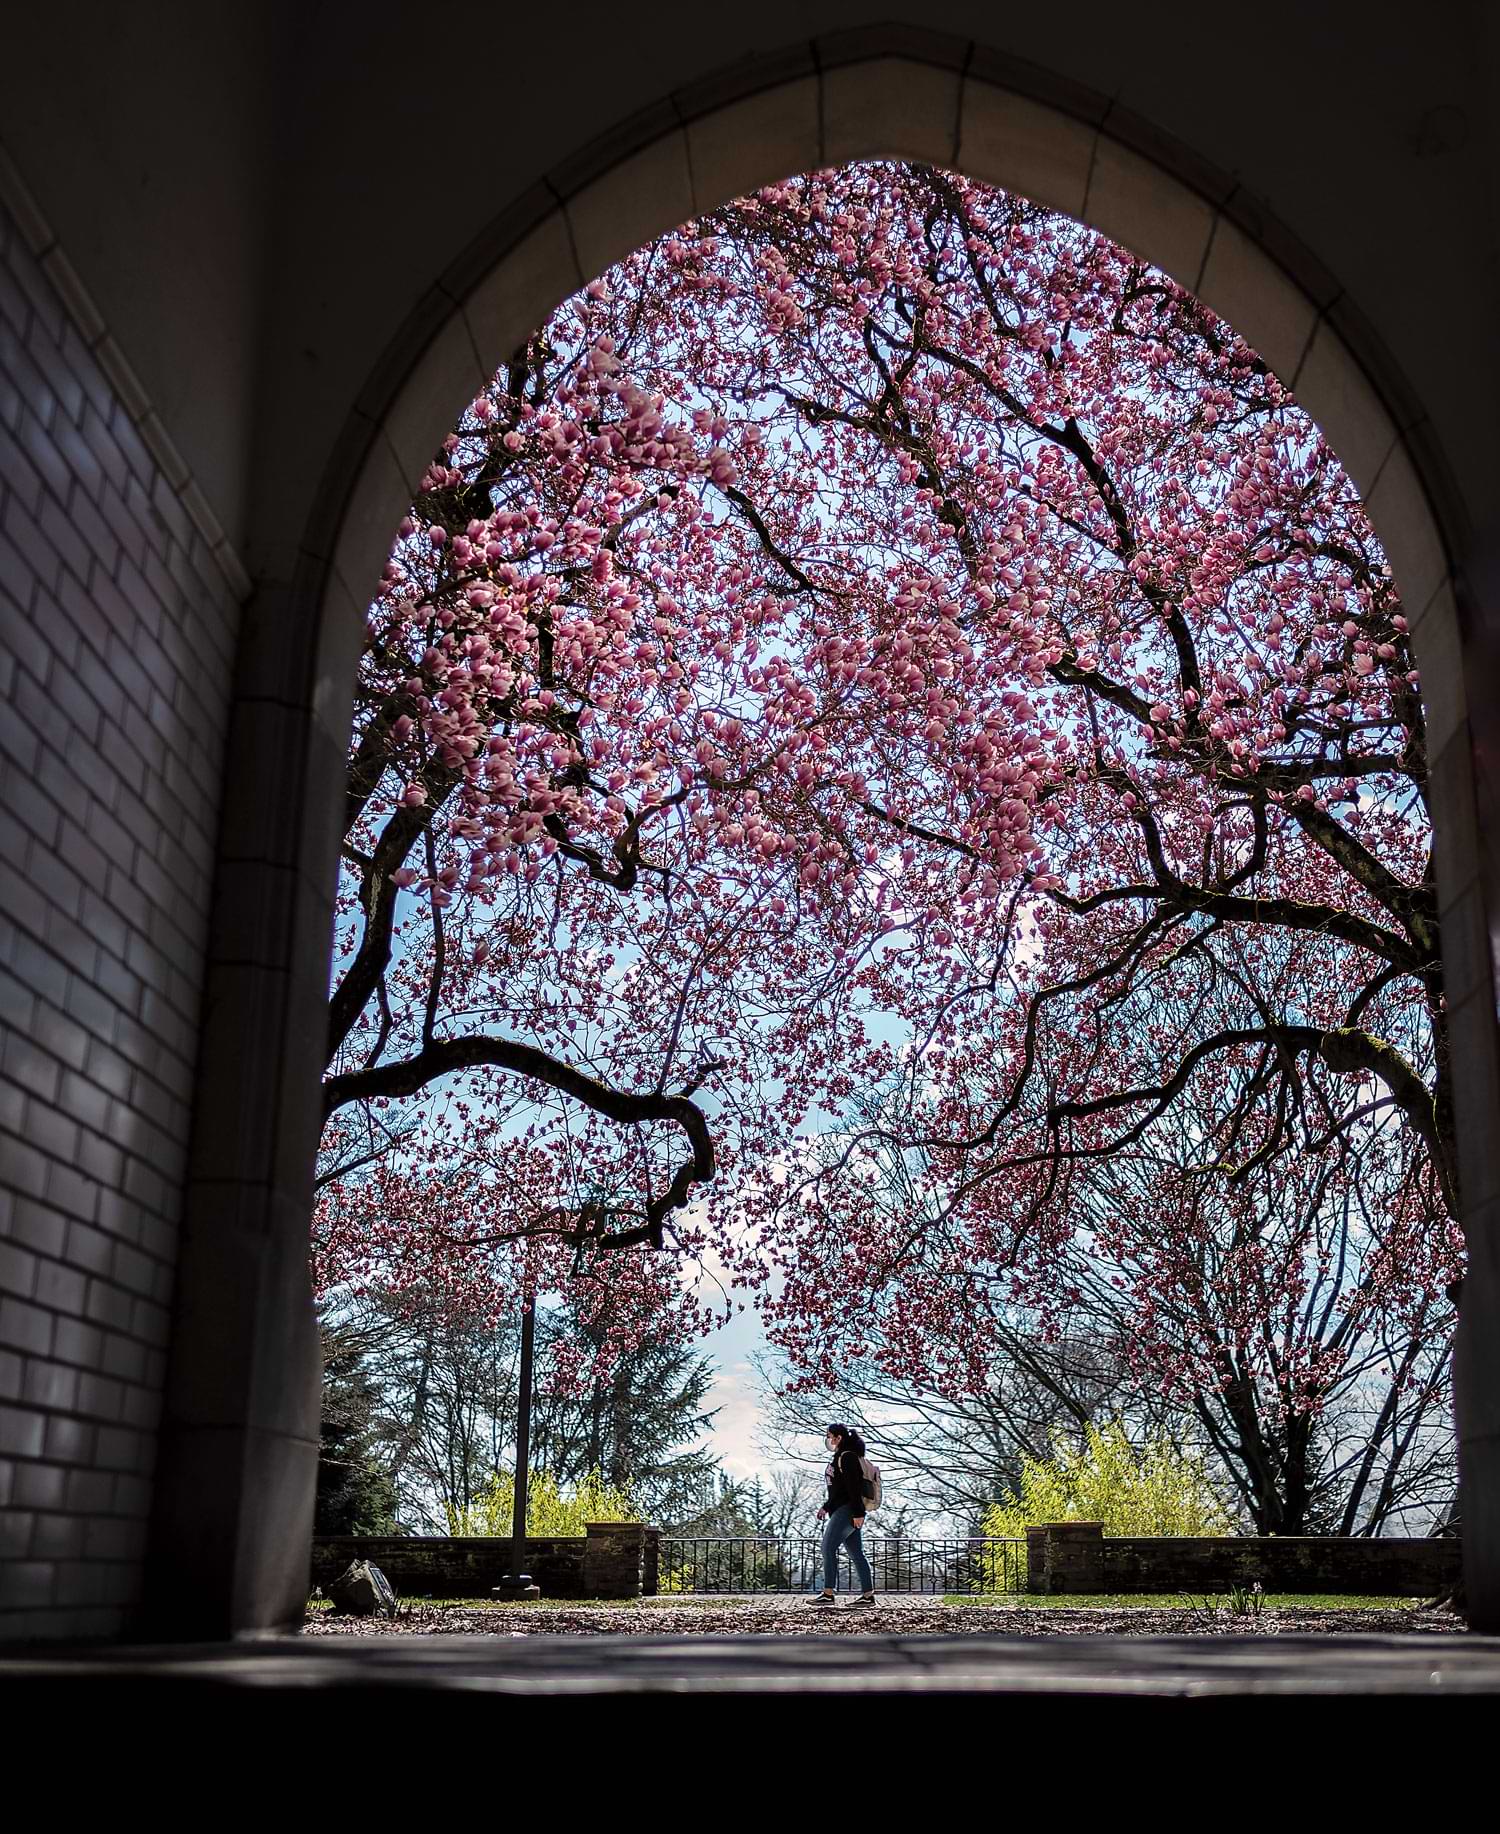 Purple flowering tree is framed by archway of tunnel